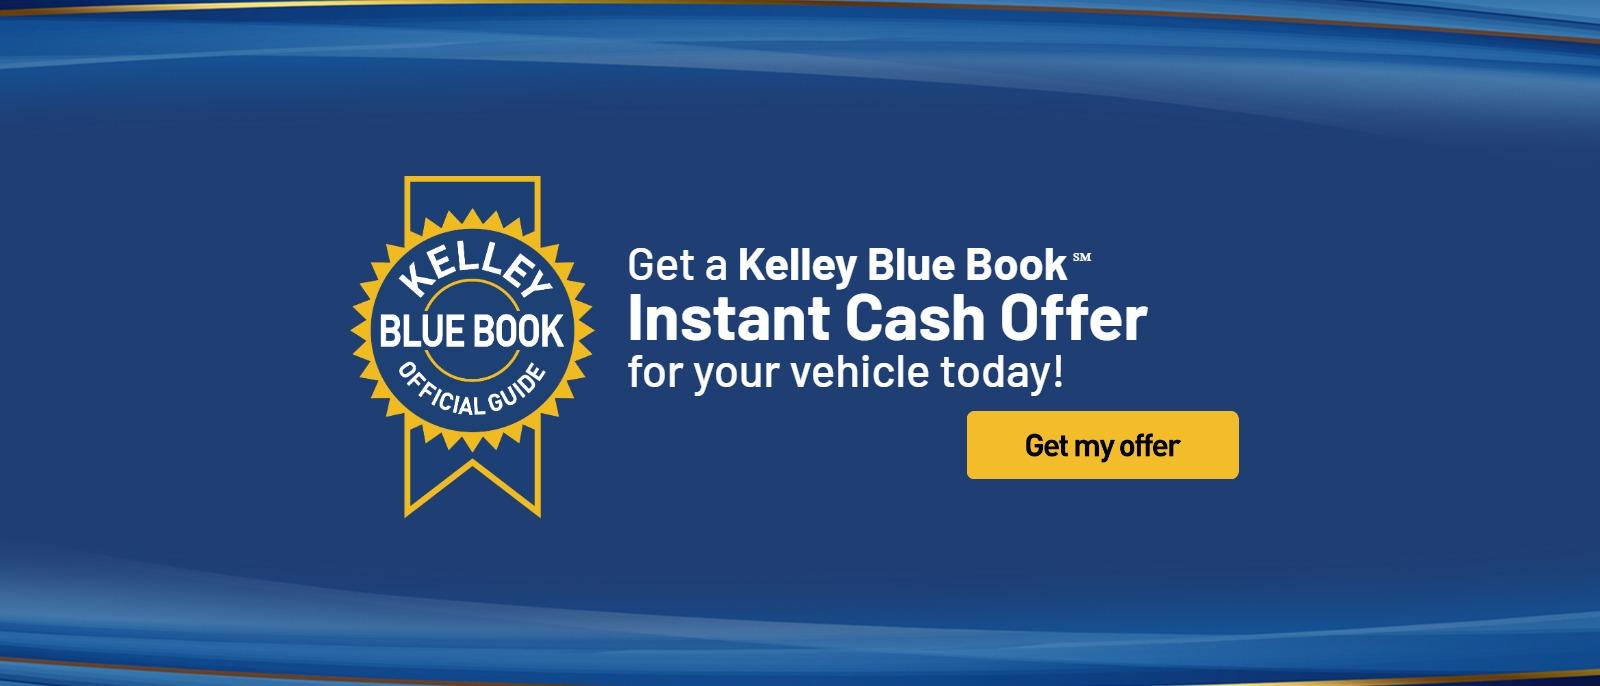 Get a kelly Blue book, Instant Cash Offer,. For Your Vehicle Today!